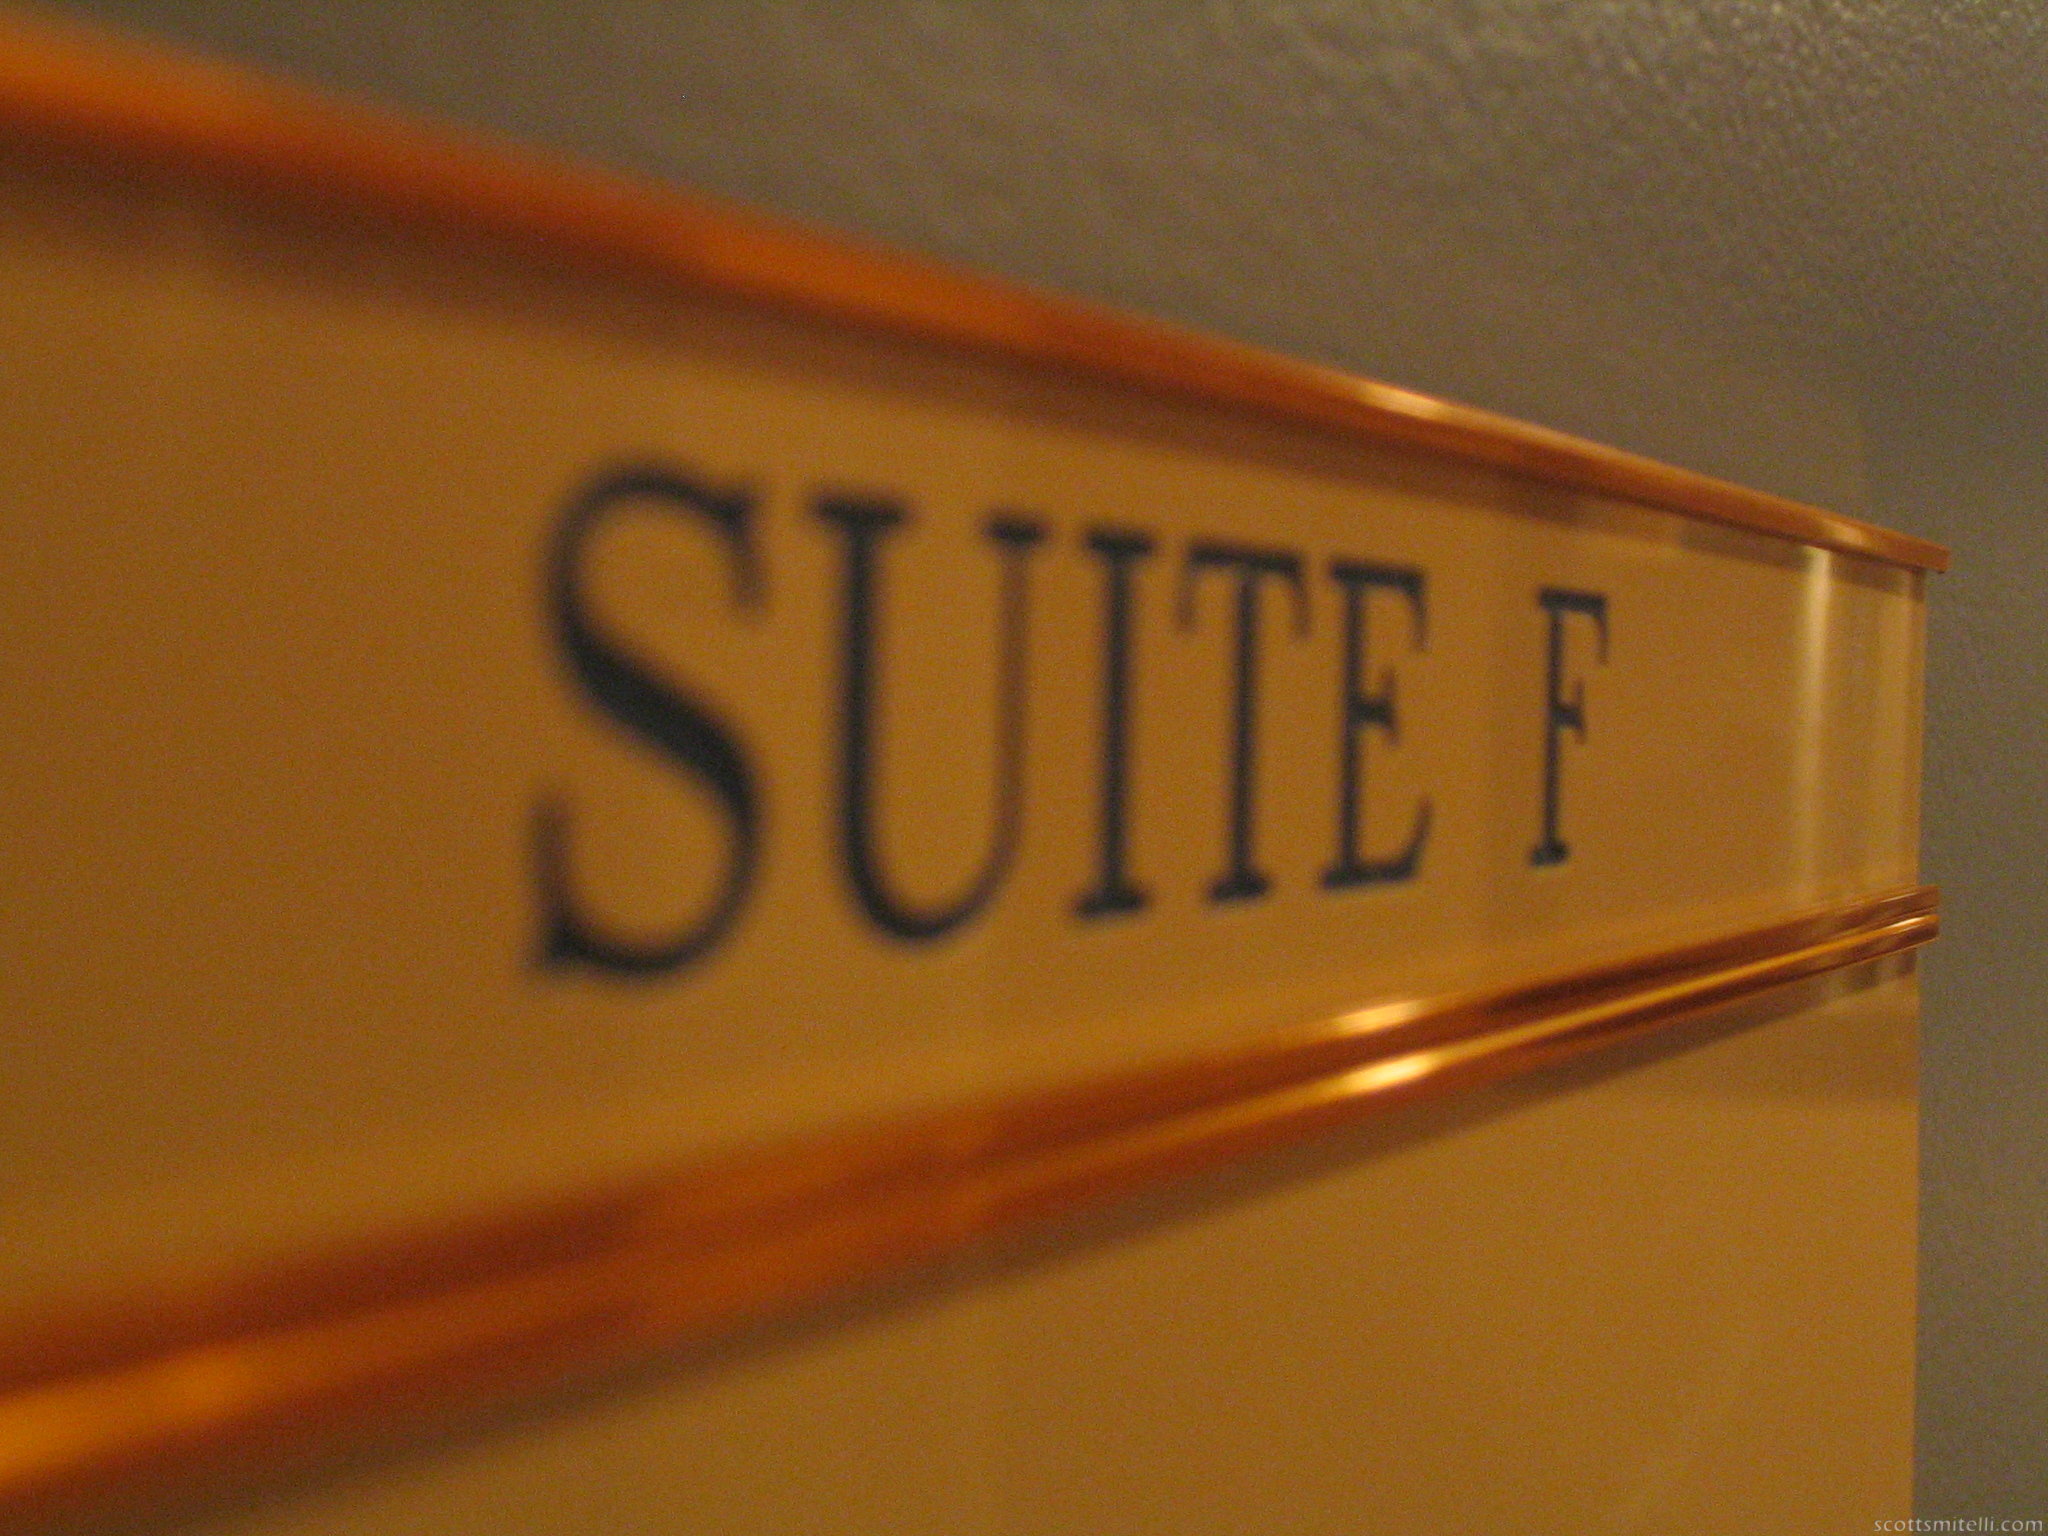 Second Suite in F?